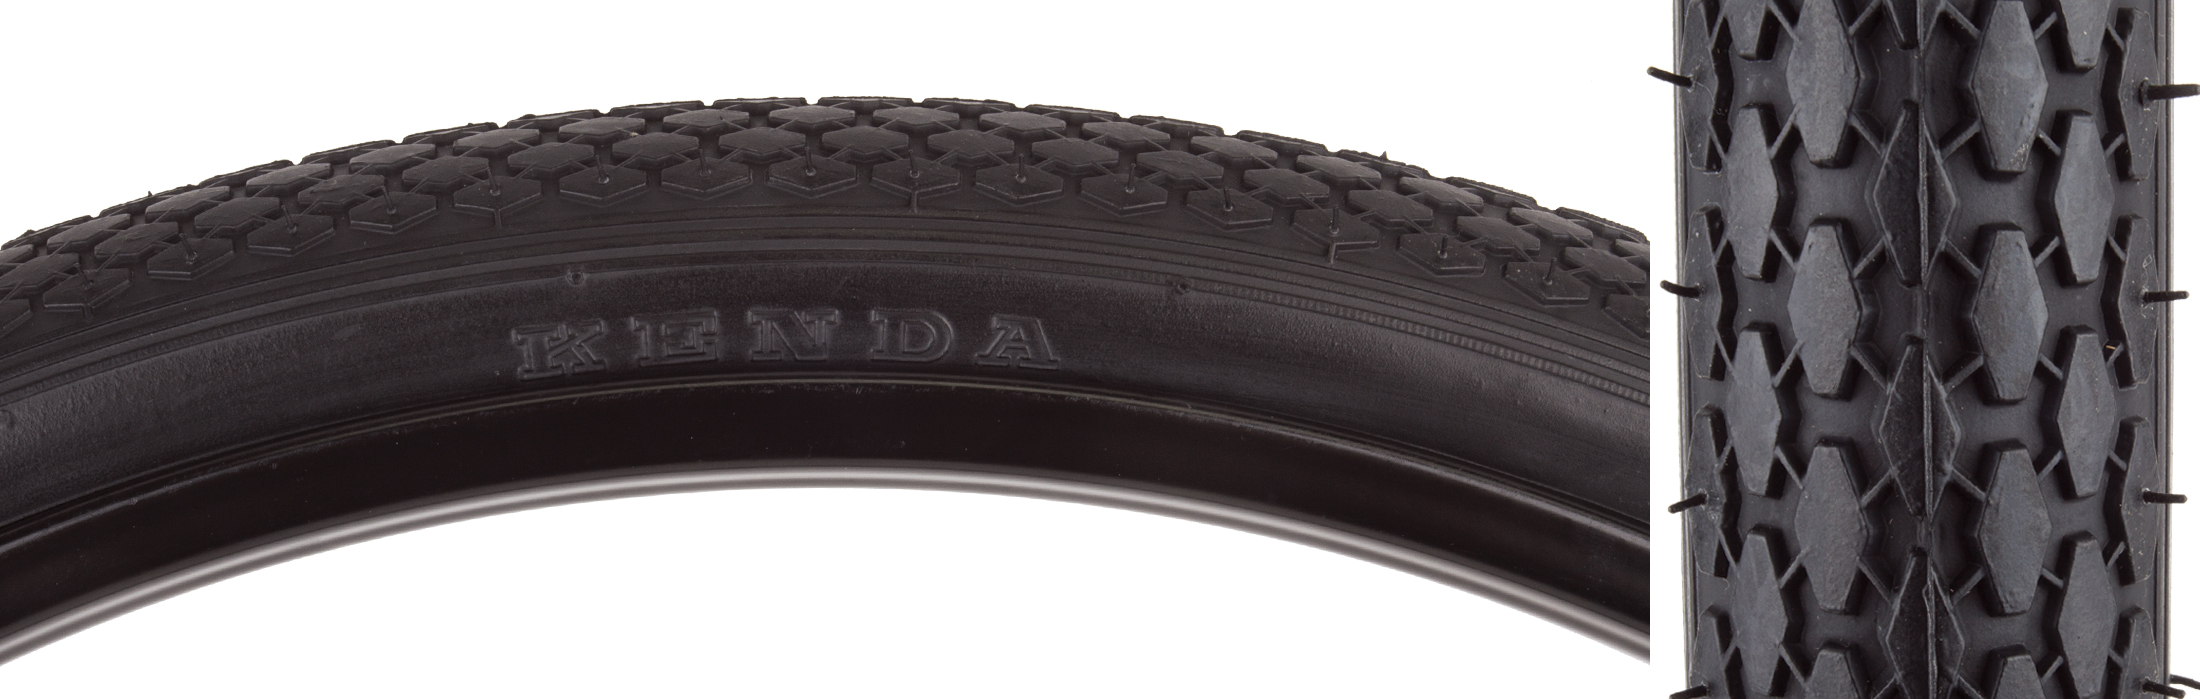 SUNLITE STREET S-7  26" x 1-3/4"  BLACK/WHITEWALL BICYCLE TIRE 